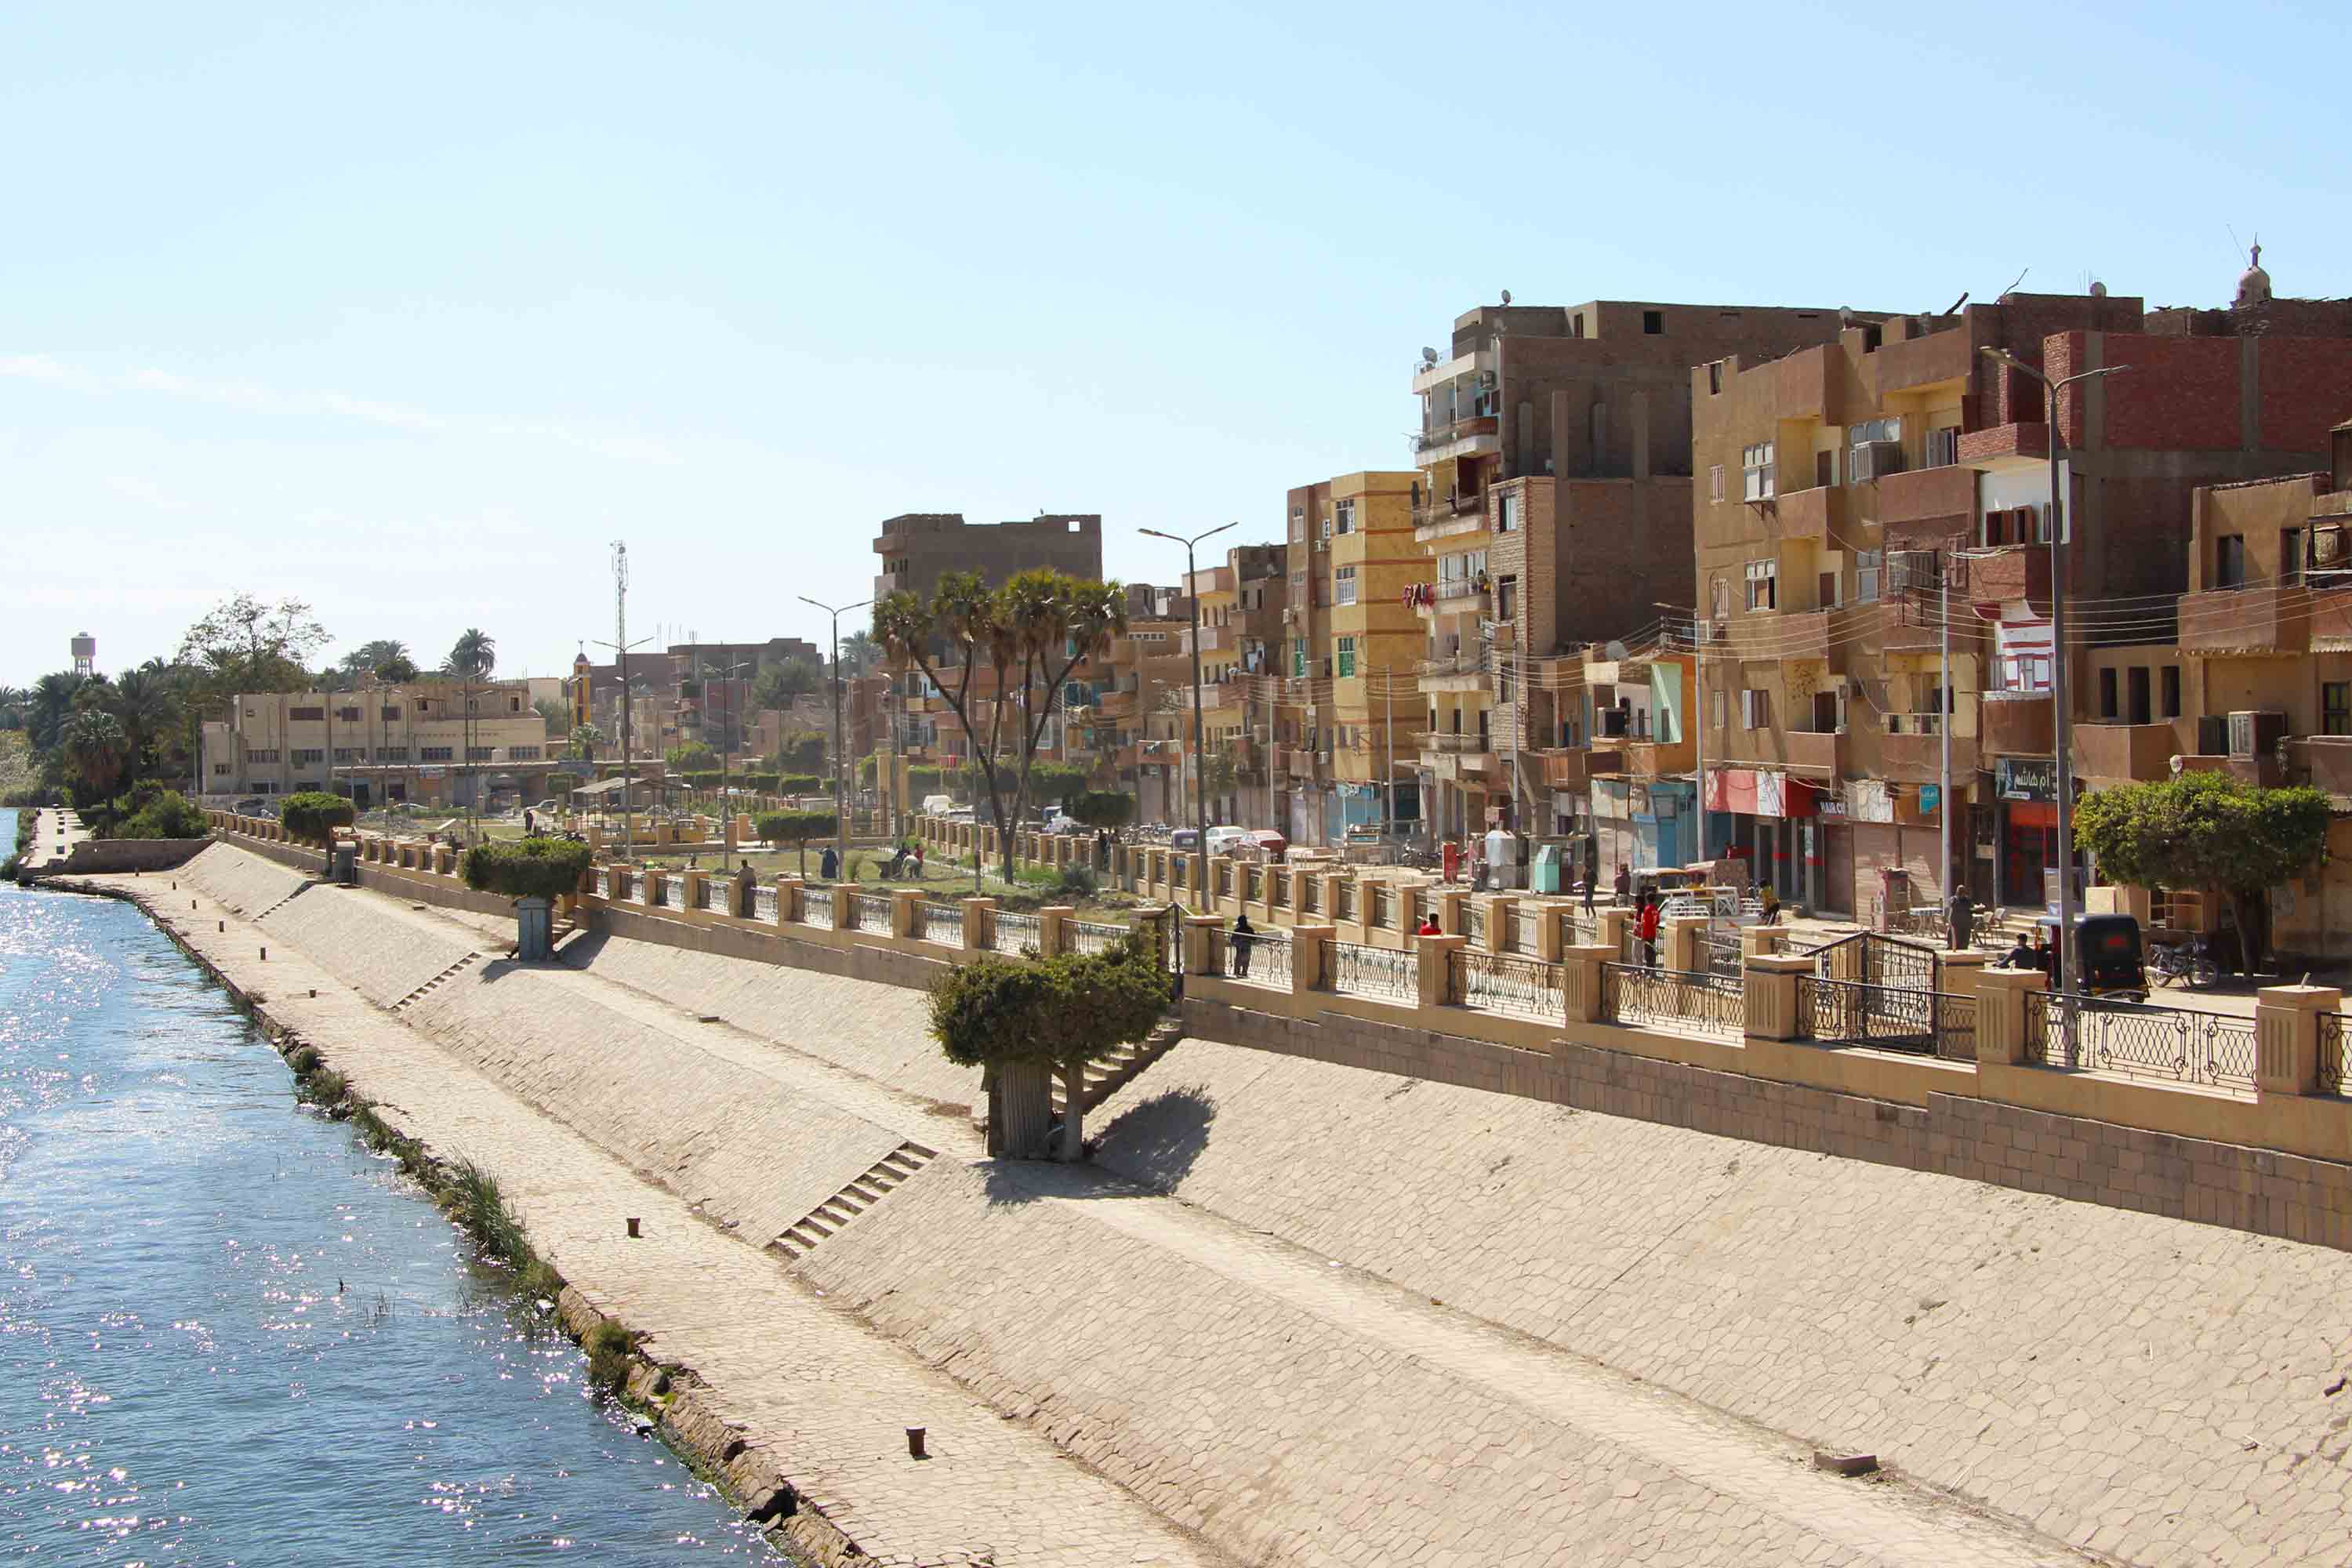 City of Esna, built up along the shores of Egypt’s Nile River